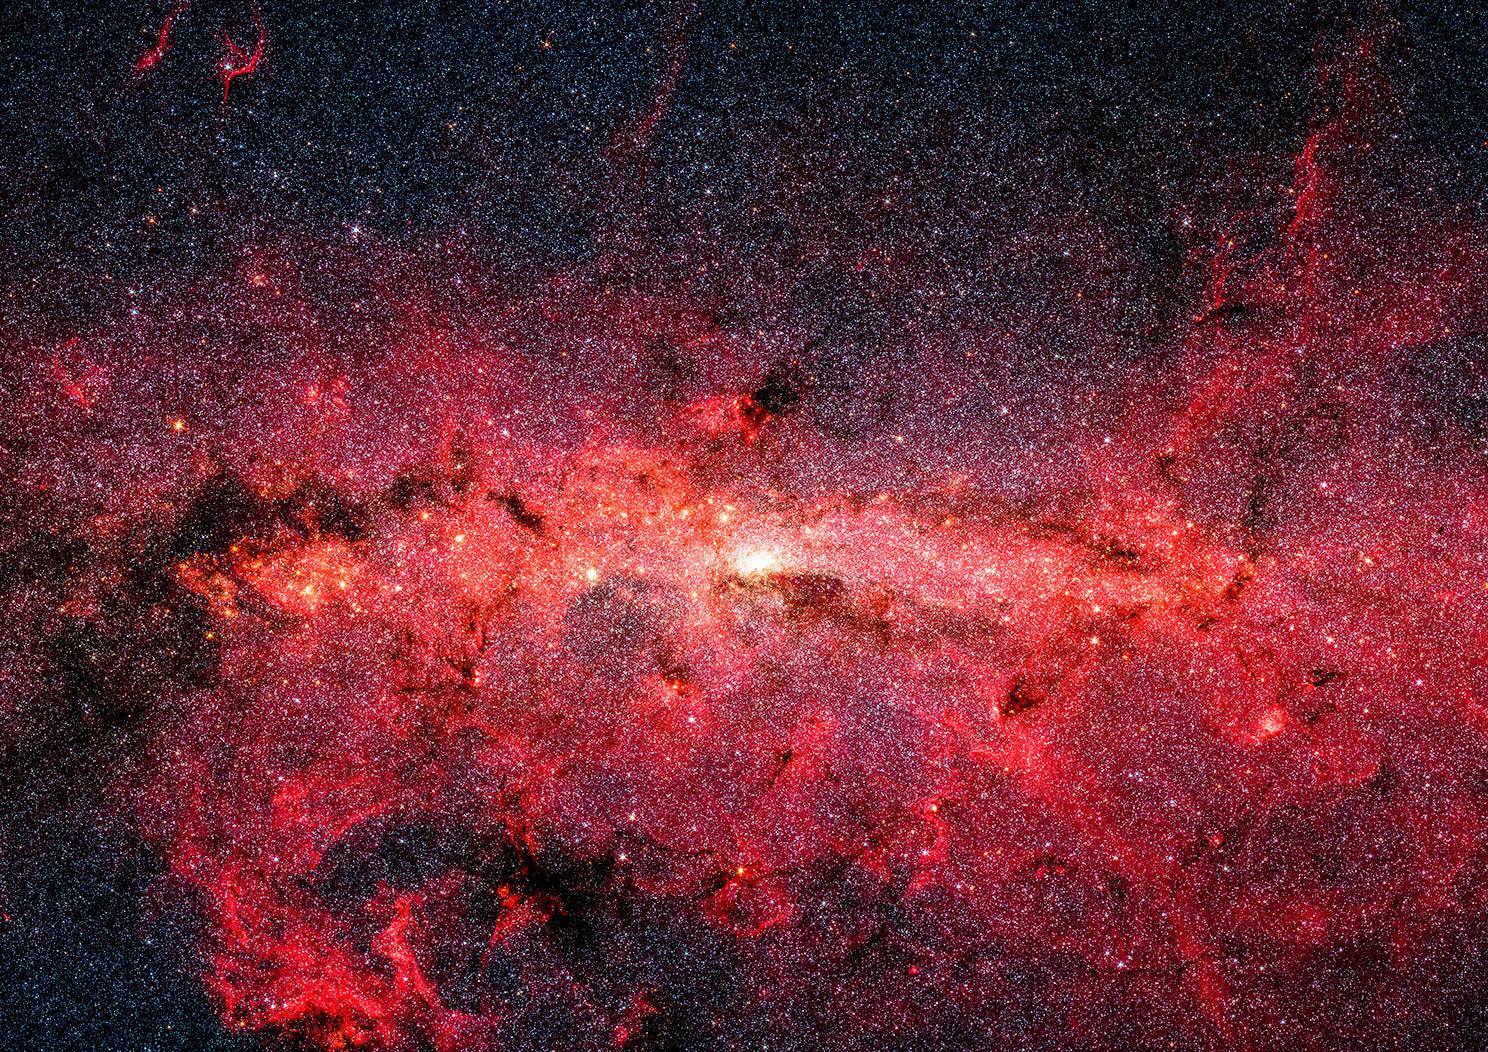 MILKY WAY POSTER: Red Galaxy of Stars Image by NASA - Pimlico Prints